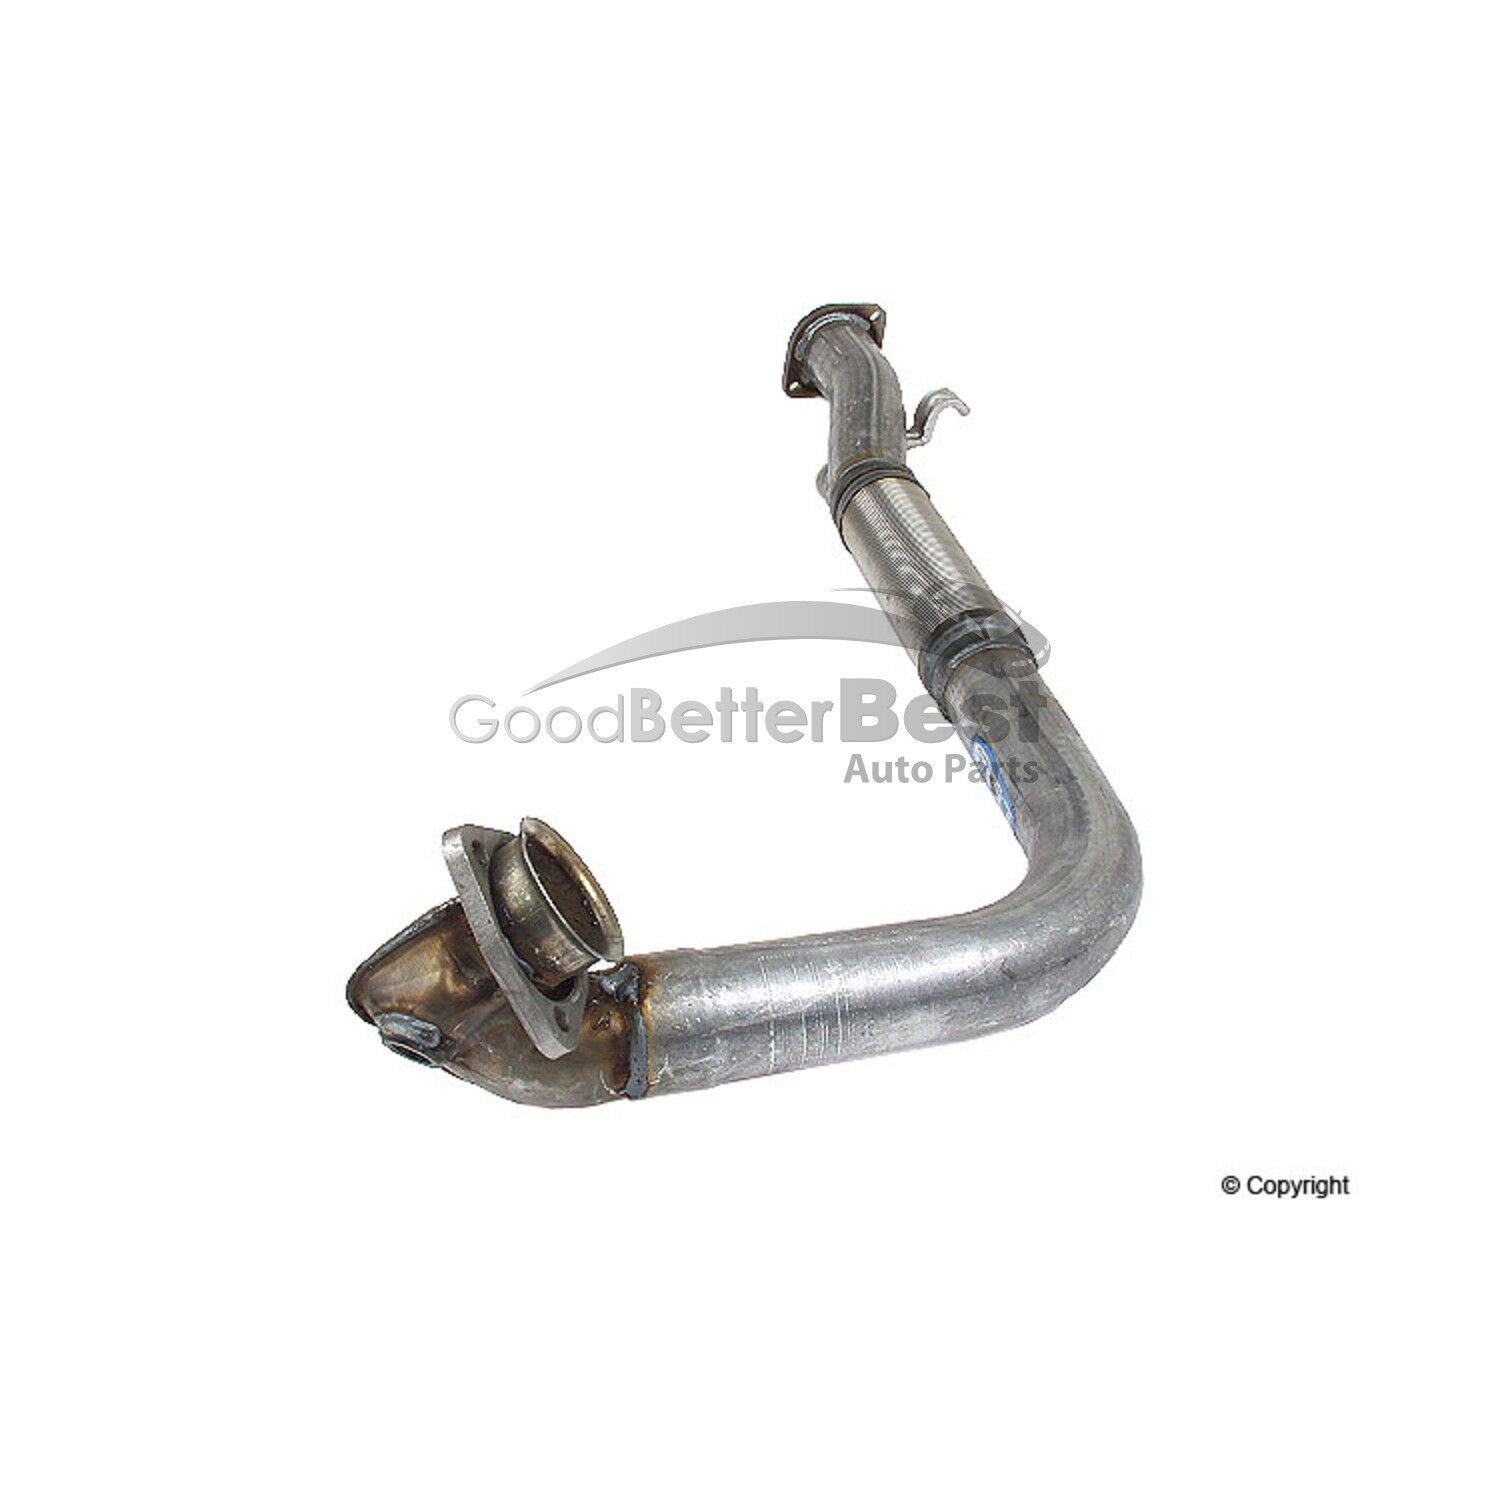 One New Starla Exhaust Pipe 16305 9390600 for Saab 9000